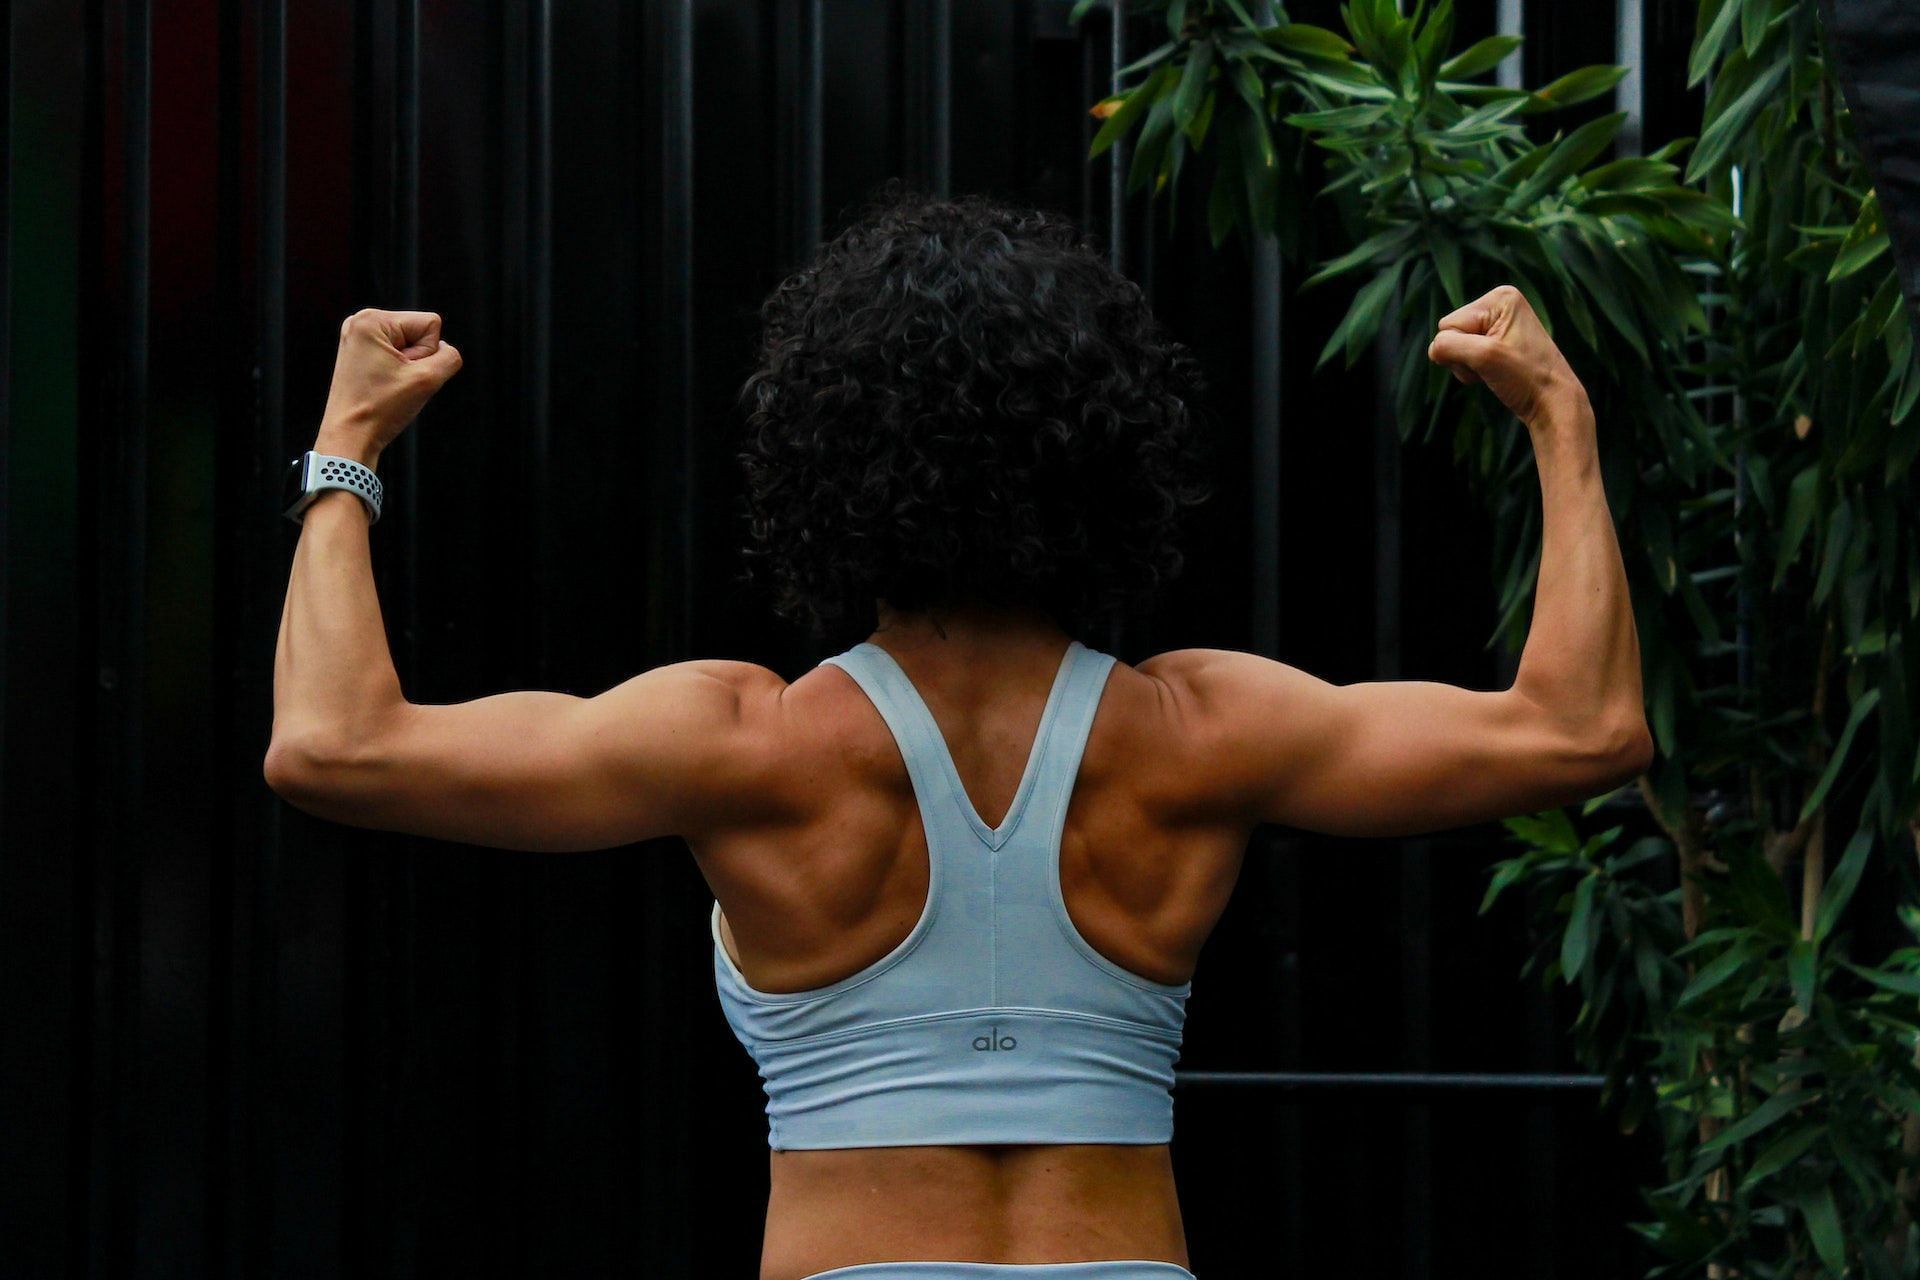 The reverse grip lat pulldown helps build a stronger and muscular back. (Photo via Pexels/Karen Irala)